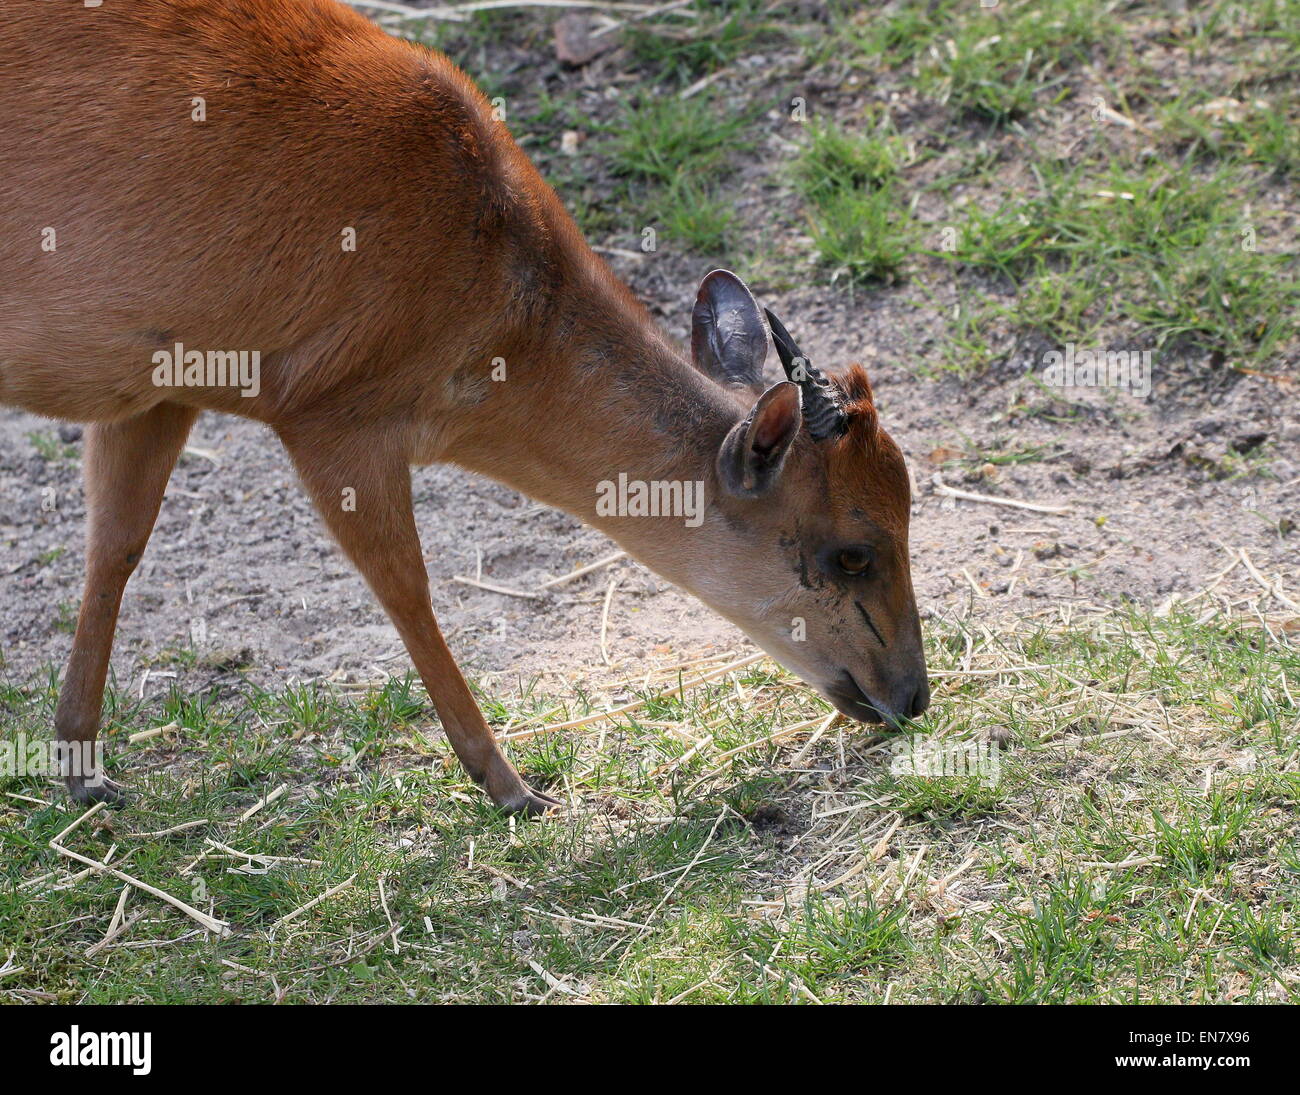 African Red forest duiker or Natal duiker antelope (Cephalophus natalensis), closeup while grazing Stock Photo